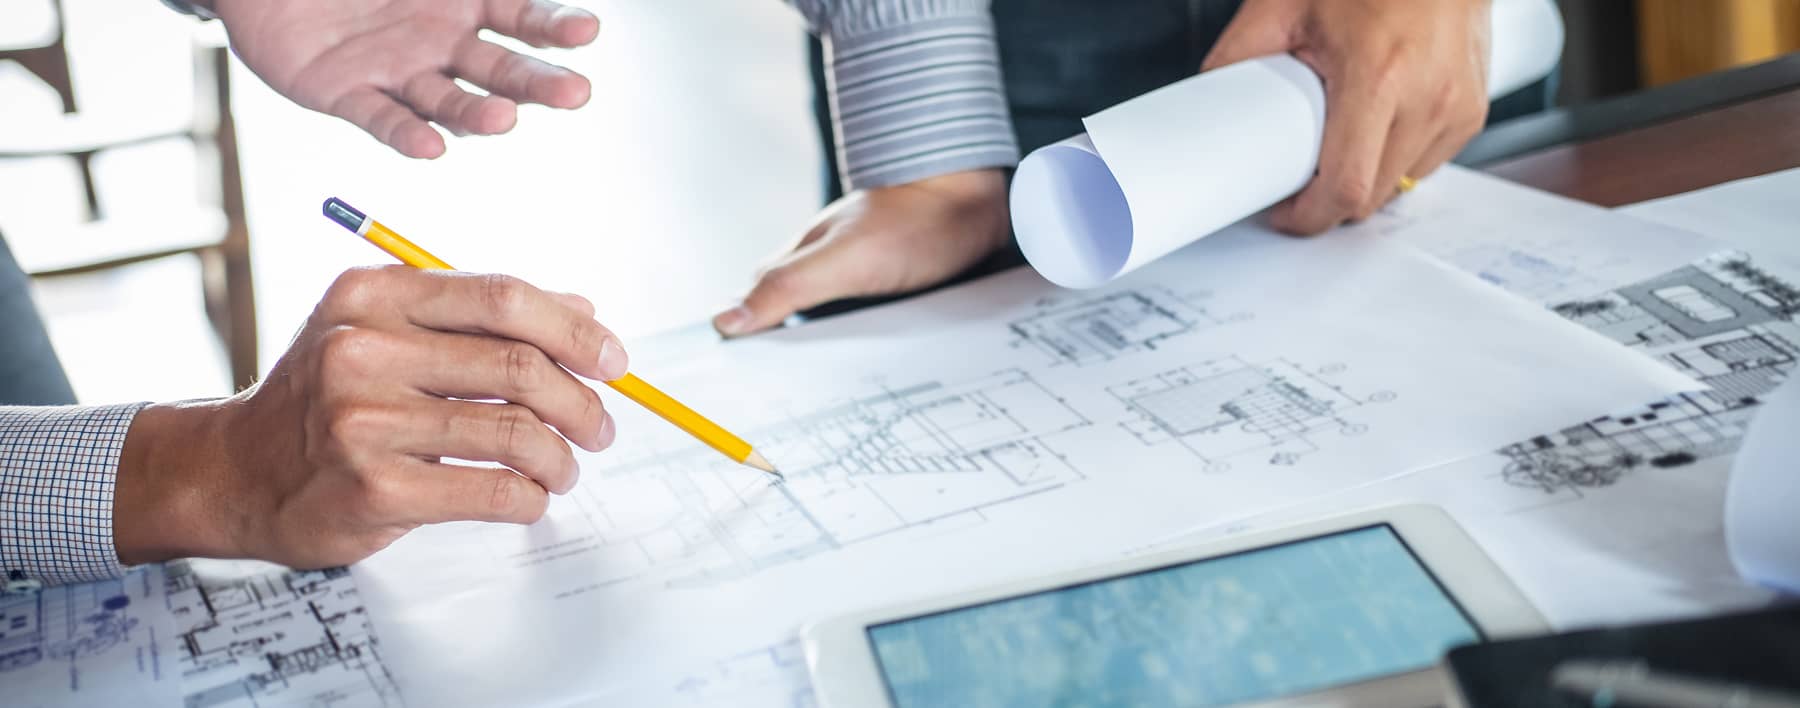 Tips for Hotel Renovations: Insights from an Experienced General Contractor | GLR, Inc.